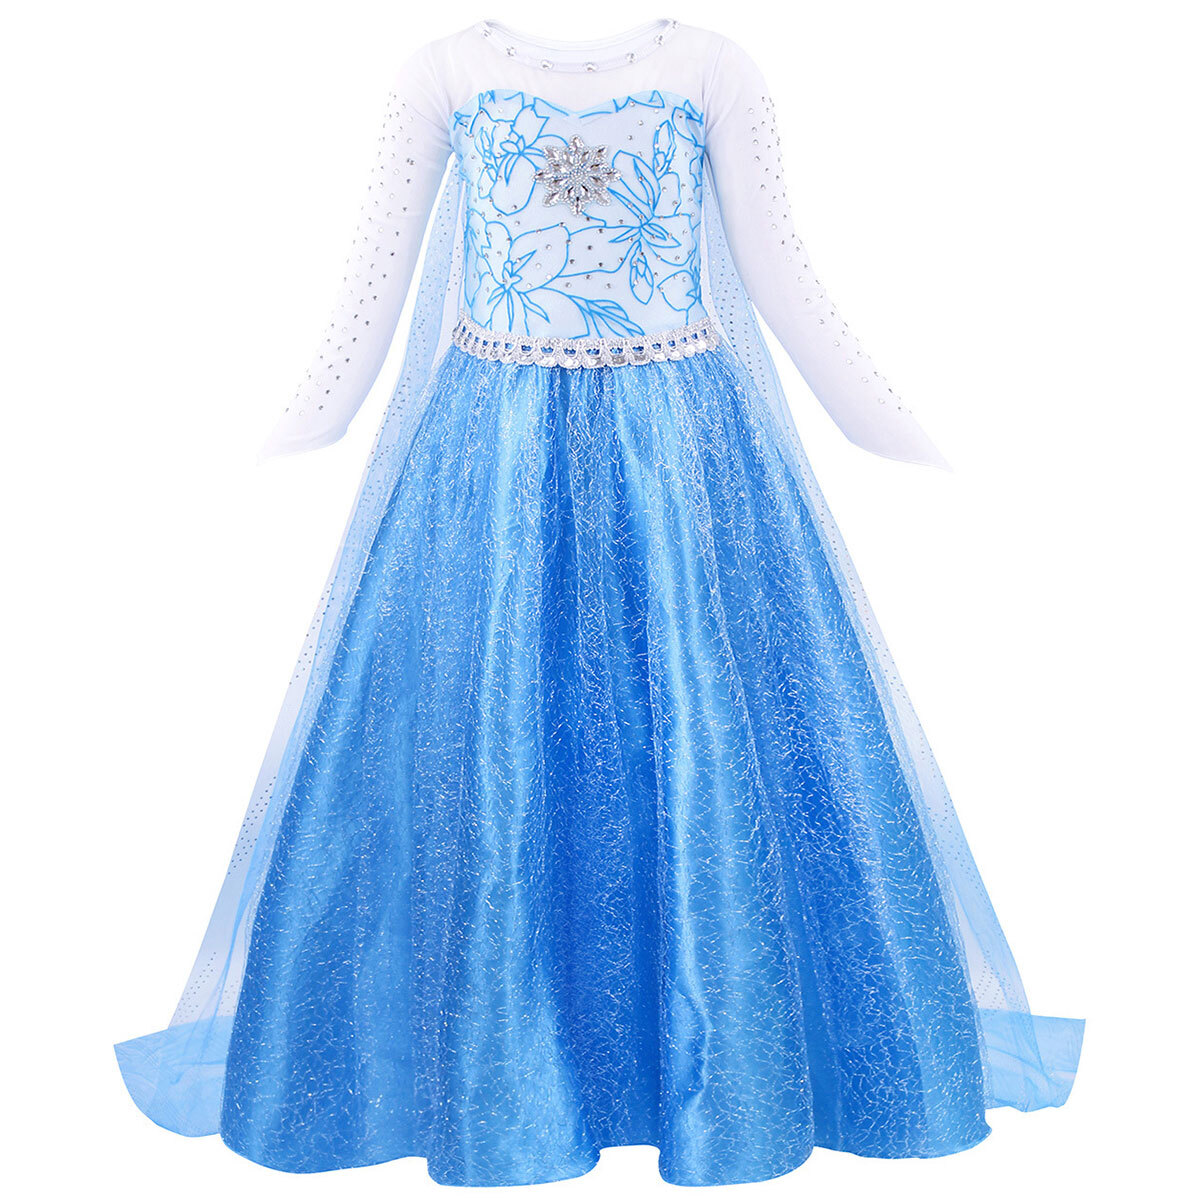 Girls Elsa Dress Snow Queen Princess Costume Party Dress up for 3-9 Year - image 1 of 8